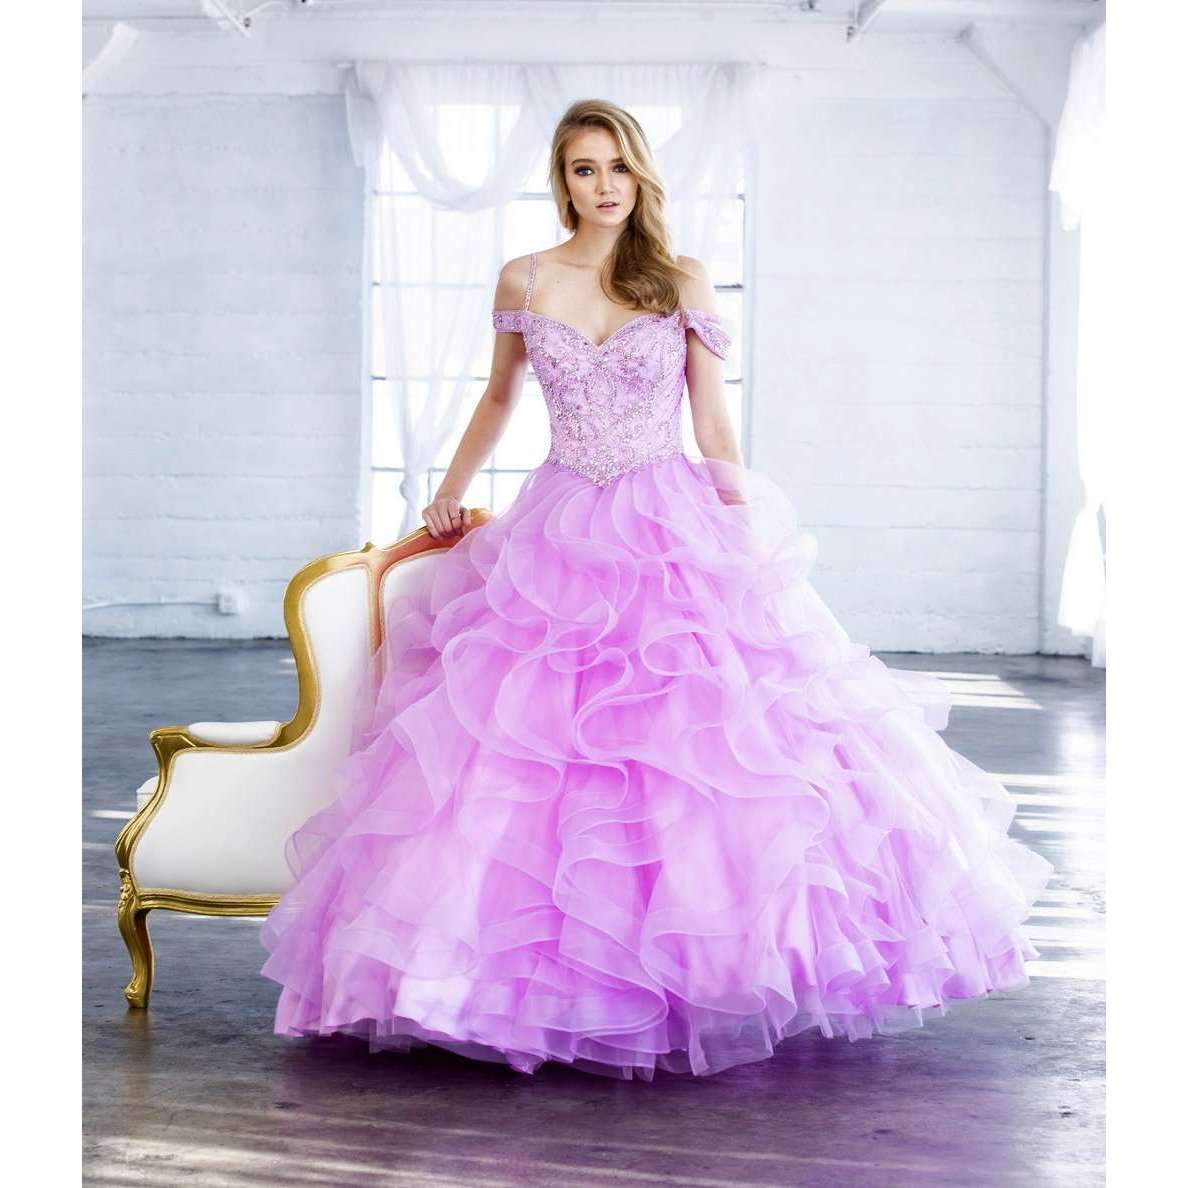 Juliet 1421 Lilac Cinderella Ball Gown Ruffled Tulle Cold Shoulder Embroidered Bodice